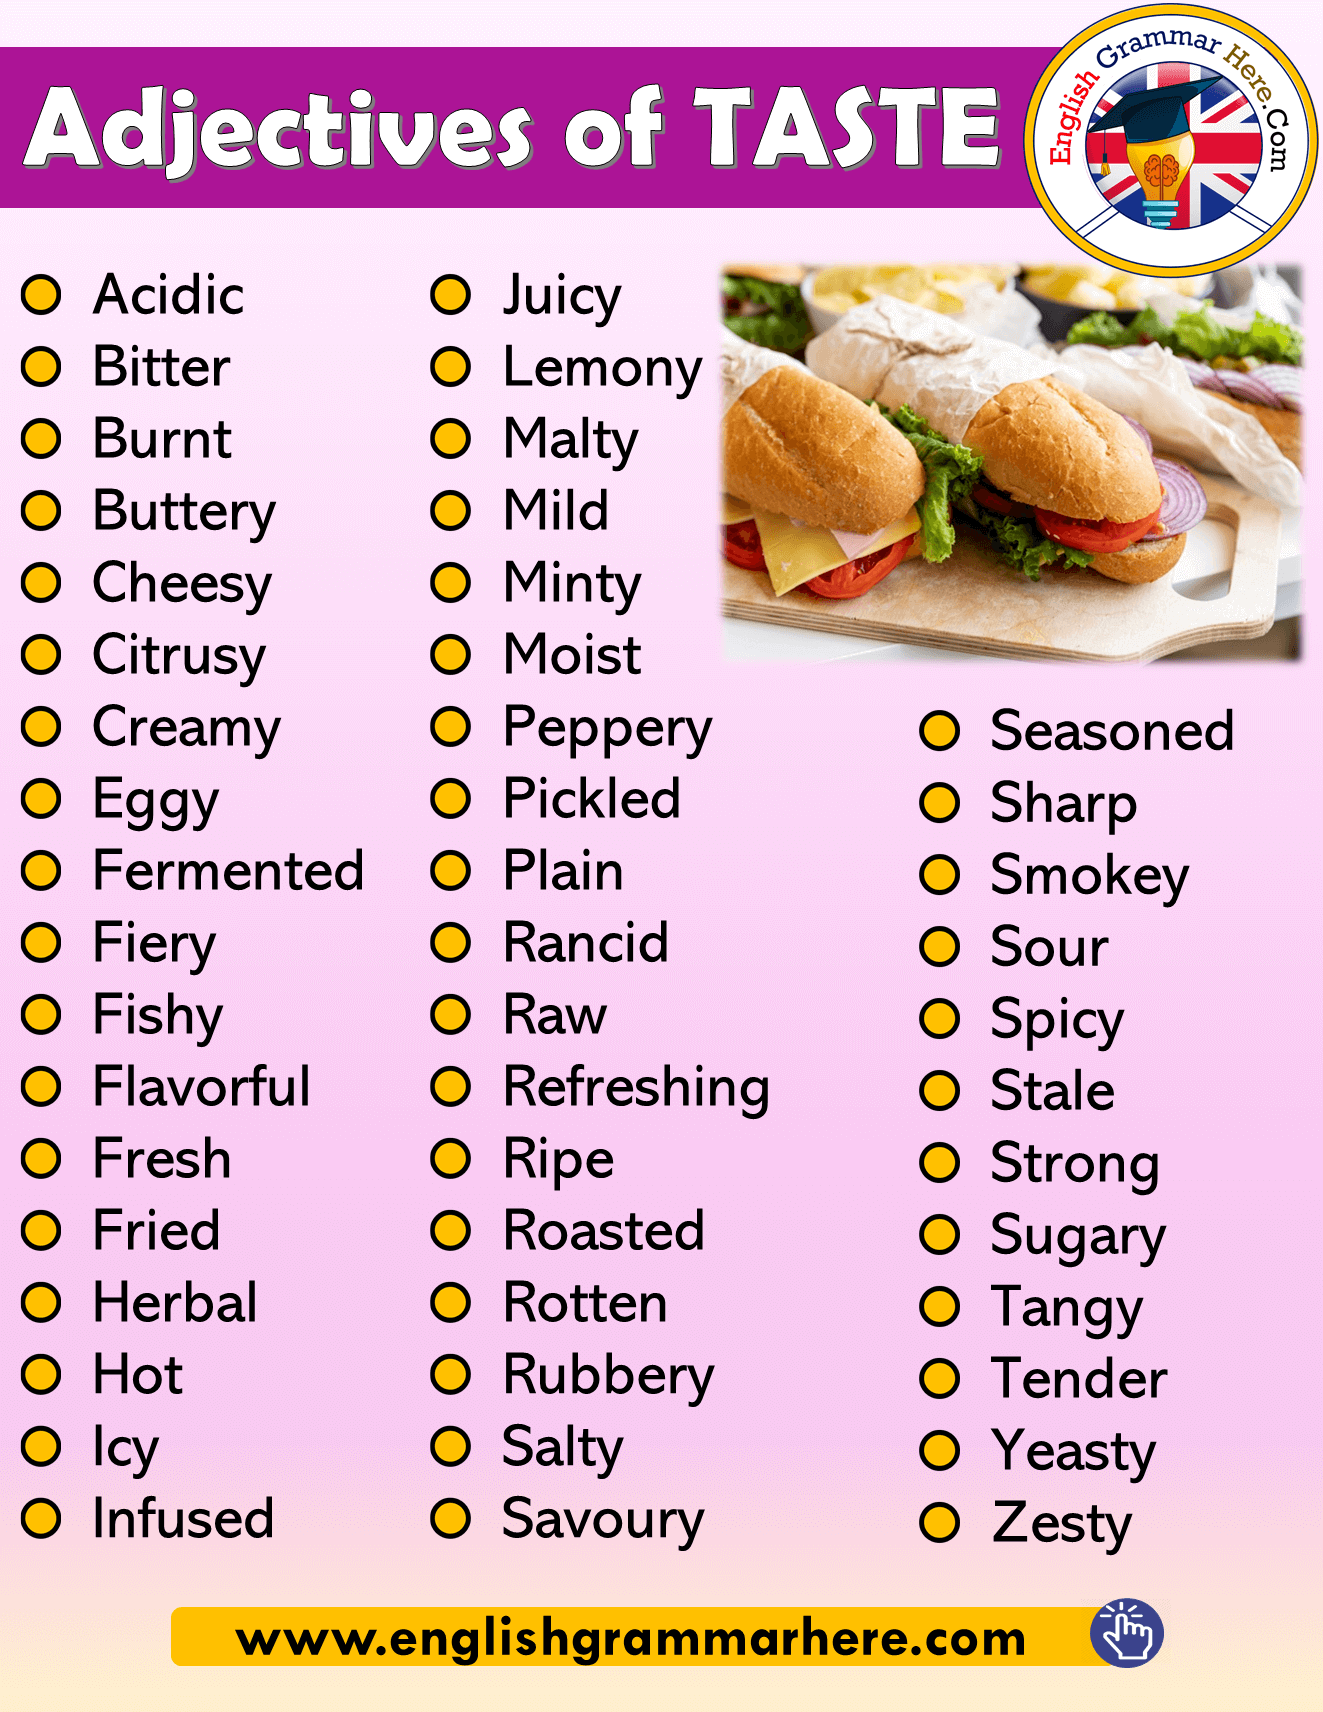 Adjectives of TASTE Vocabulary List in English